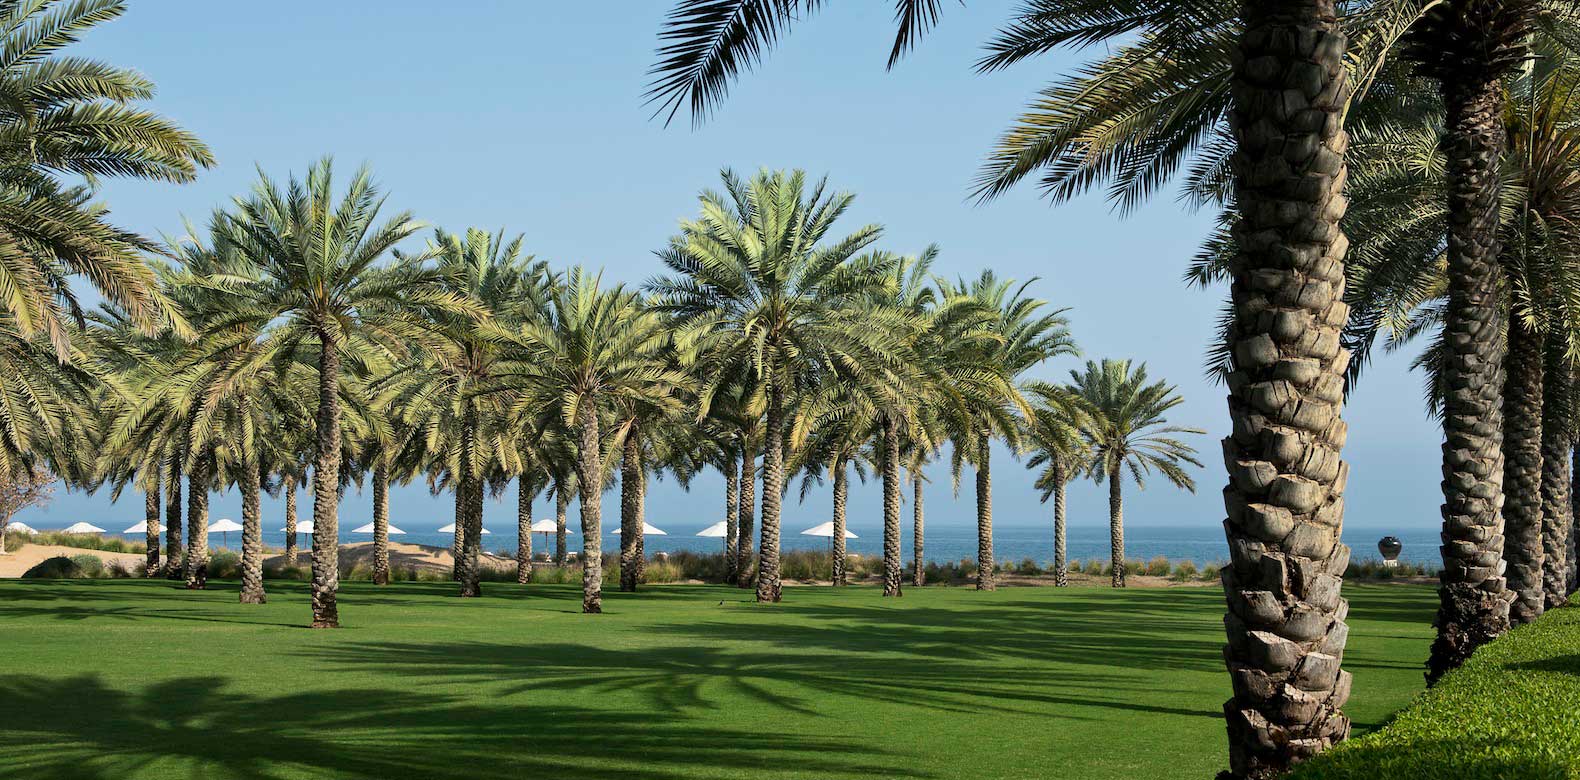 The Chedi Muscat - Gardens - GHM hotels - Luxury Hotel Oman